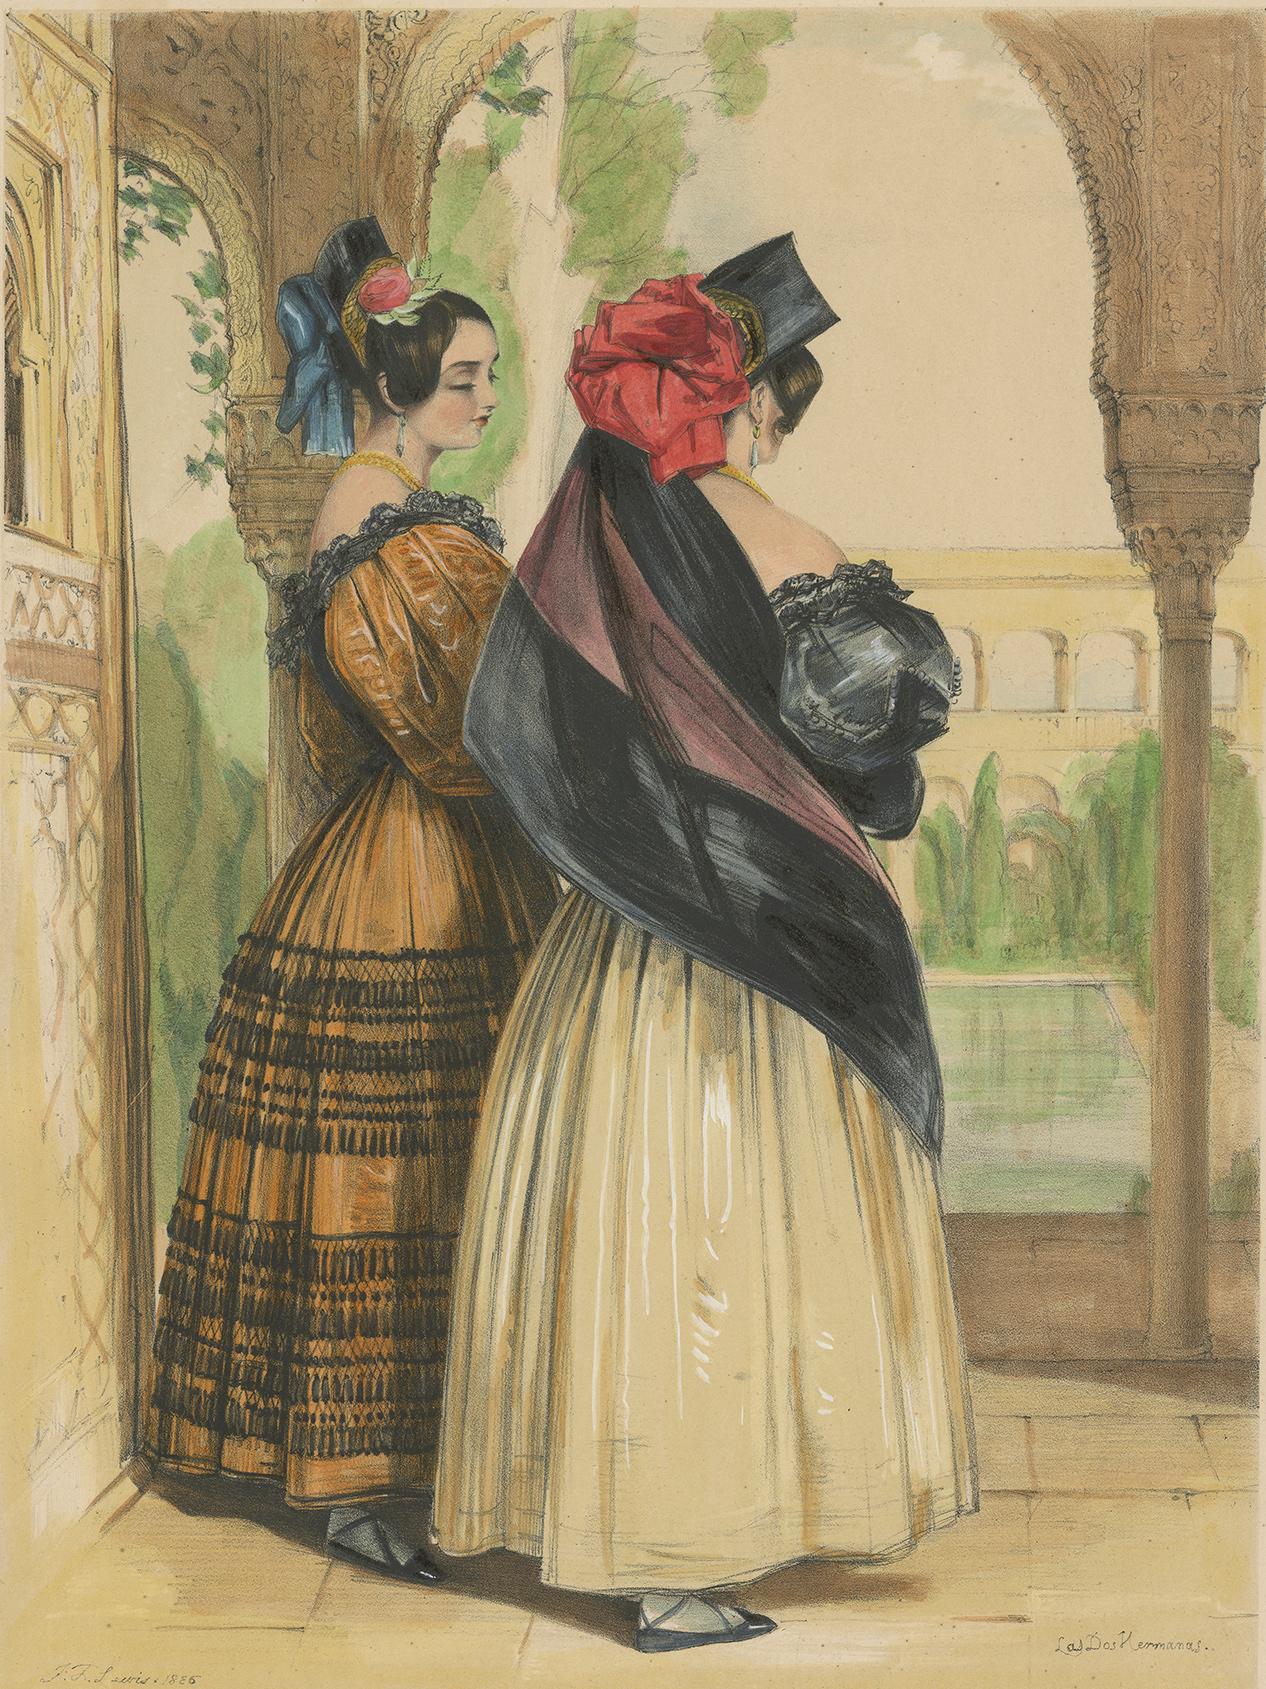 Antique print titled 'Las dos Hermanas'. Lithograph of two sisters in a traditional Spanish dress standing in an portico looking out on an interior garden. Originates from John Frederick Lewis 